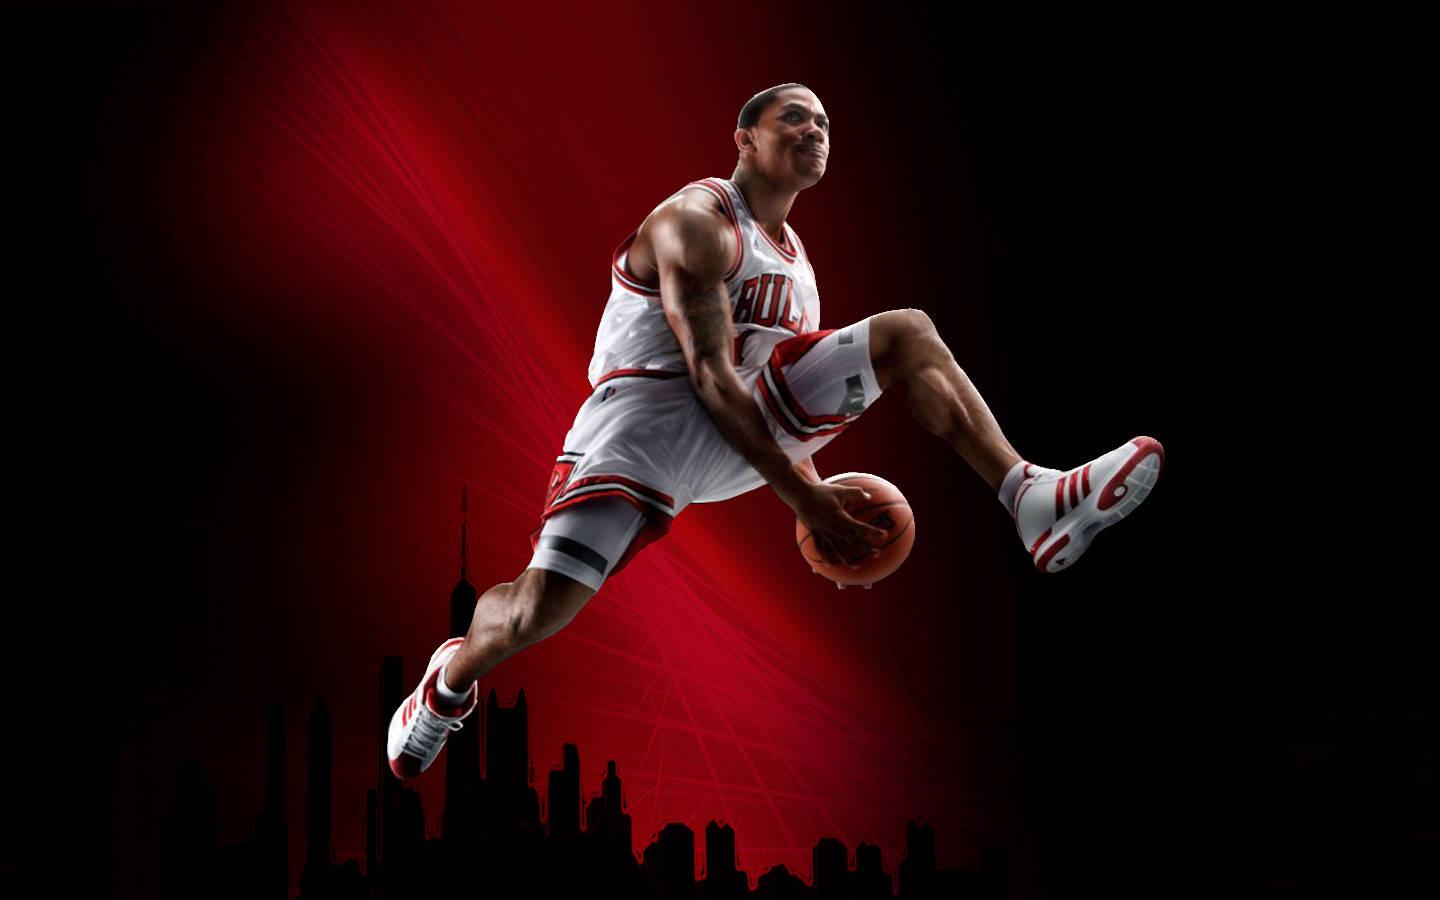 Cool basketball wallpaper images